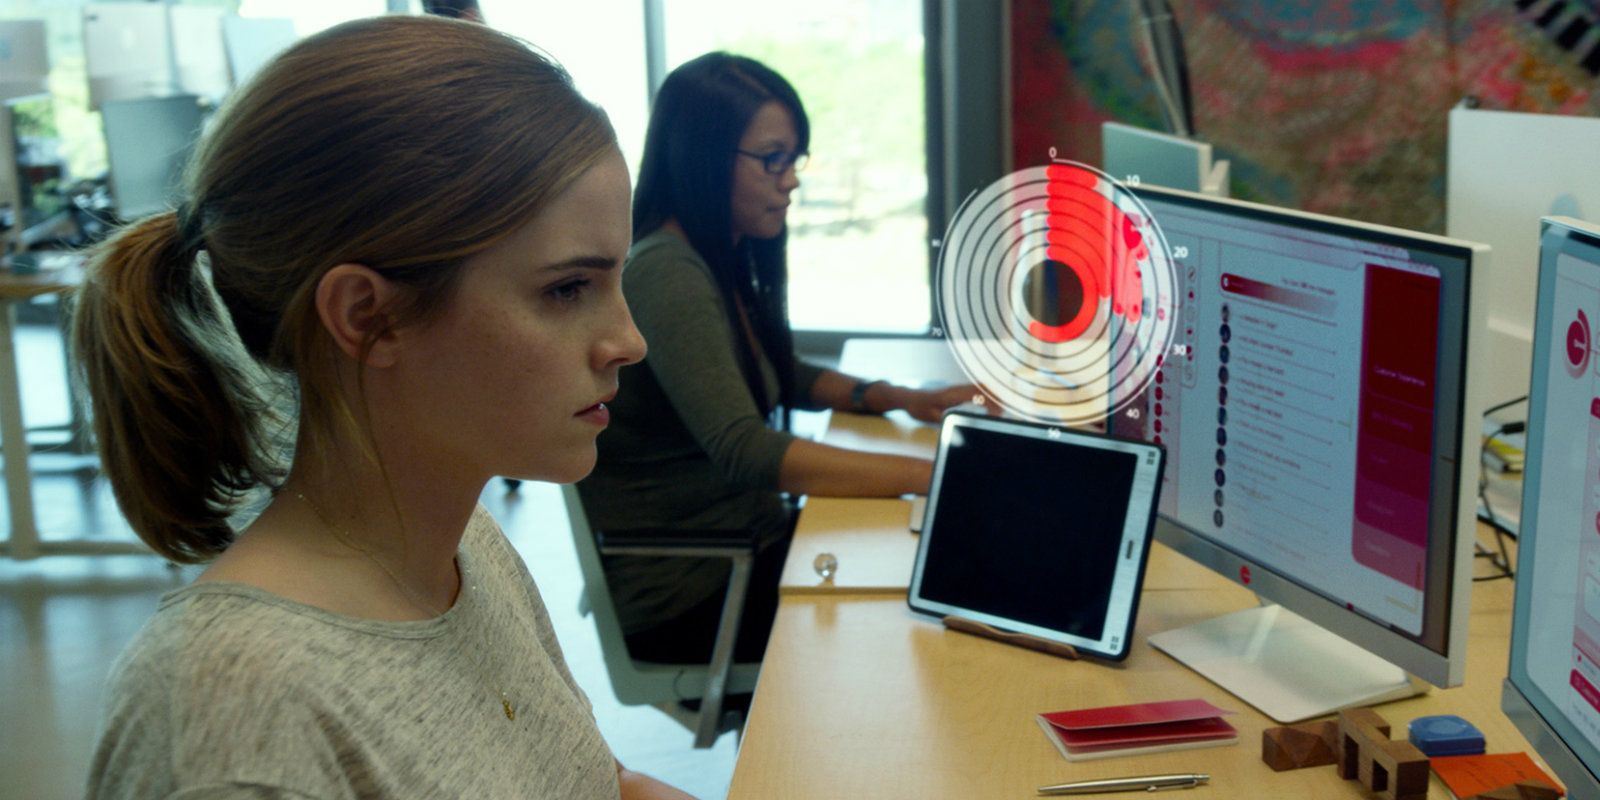 The Circle (2017) - Emma Watson experiencing the darker side of social networking. 